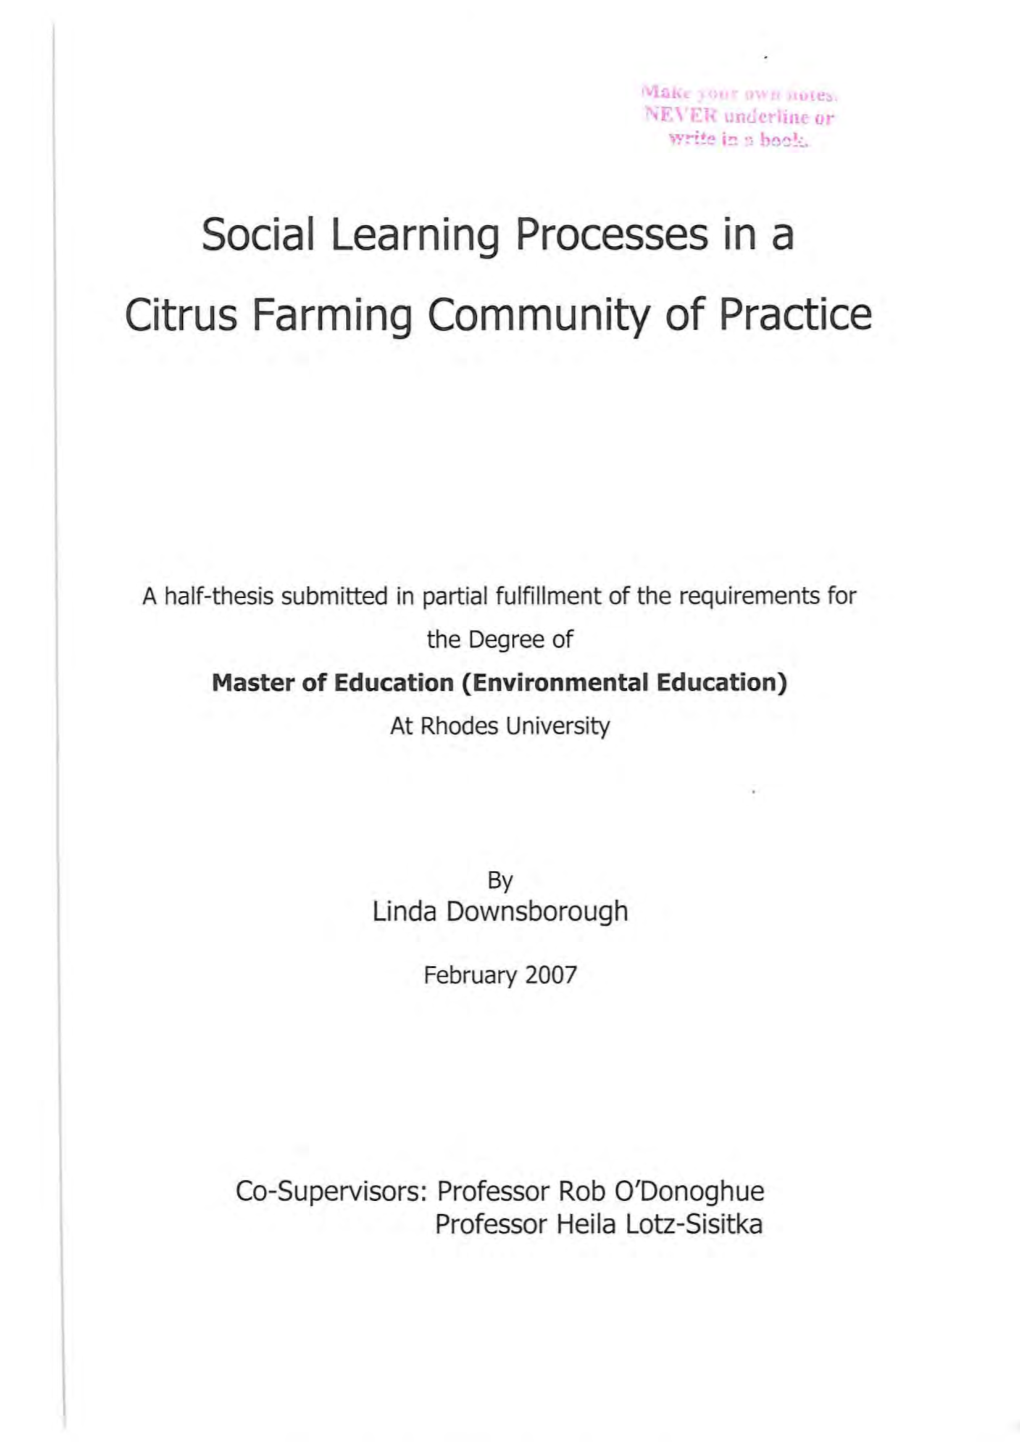 Social Learning Processes in a Citrus Farming Community of Practice